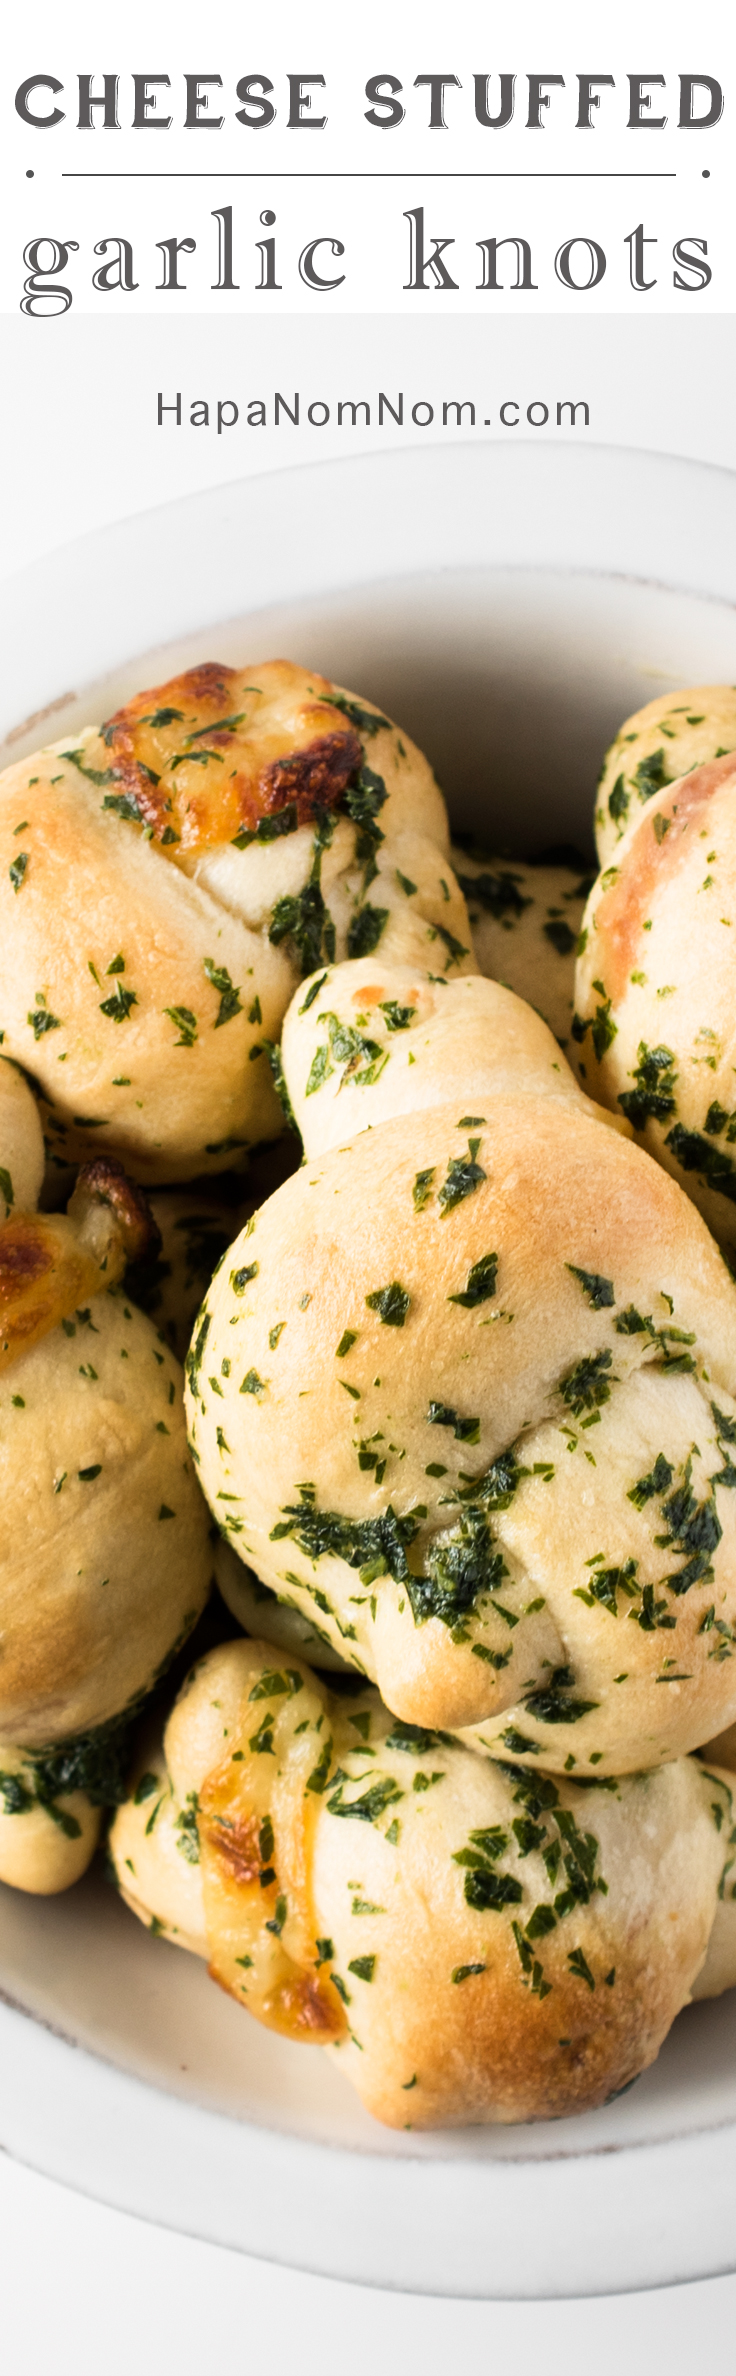 One bite of these Cheese Stuffed Garlic Knots my friends, and you'll be in garlic bread heaven. Talk about wanting to eat all 8 of them - I seriously had to put the knots down and just away.